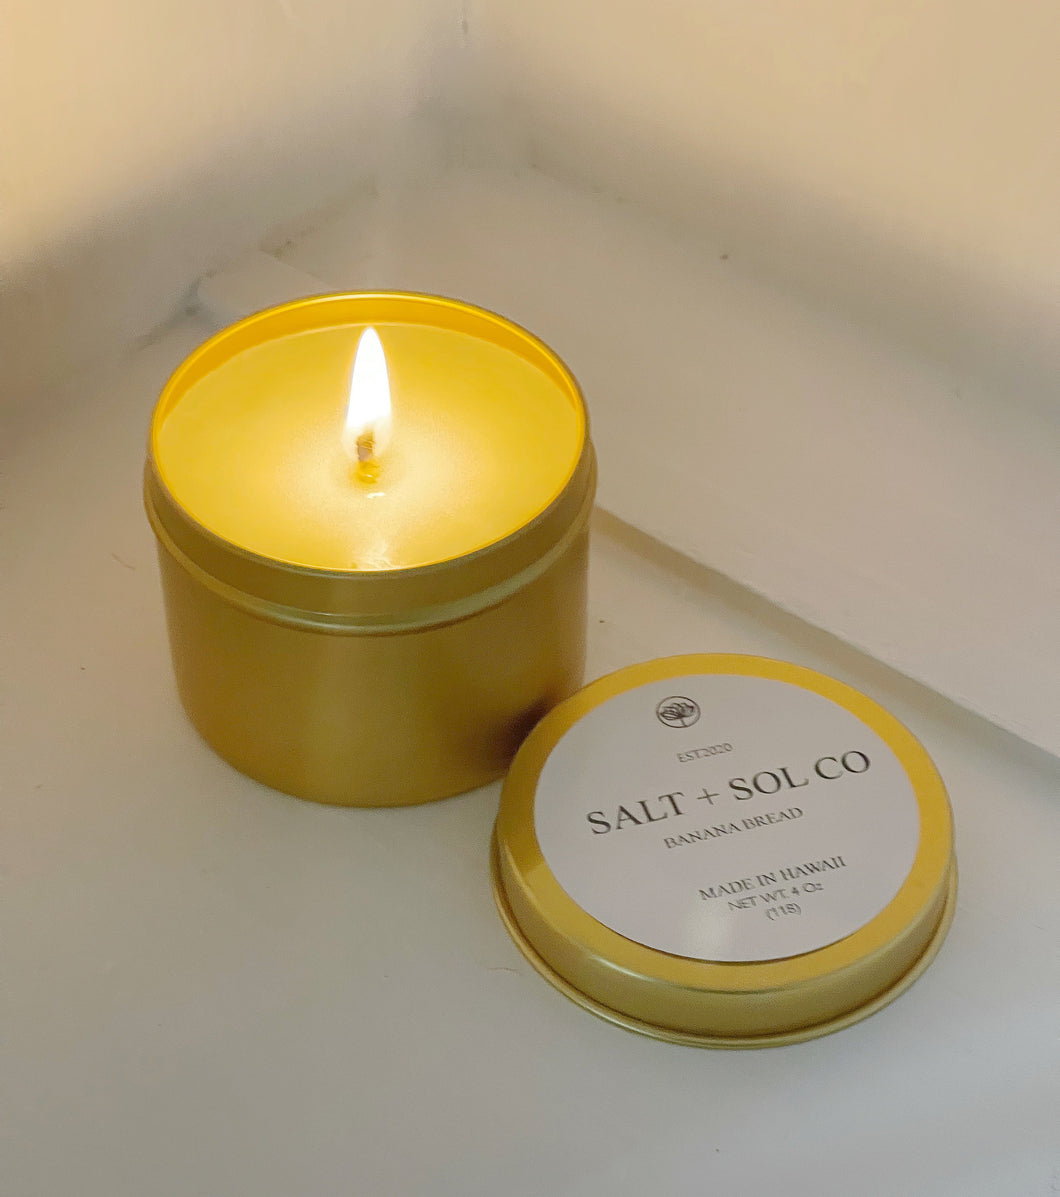 Banana bread scented 4 Oz  candle for sale at SALT + SOL CO made in Hawaii 